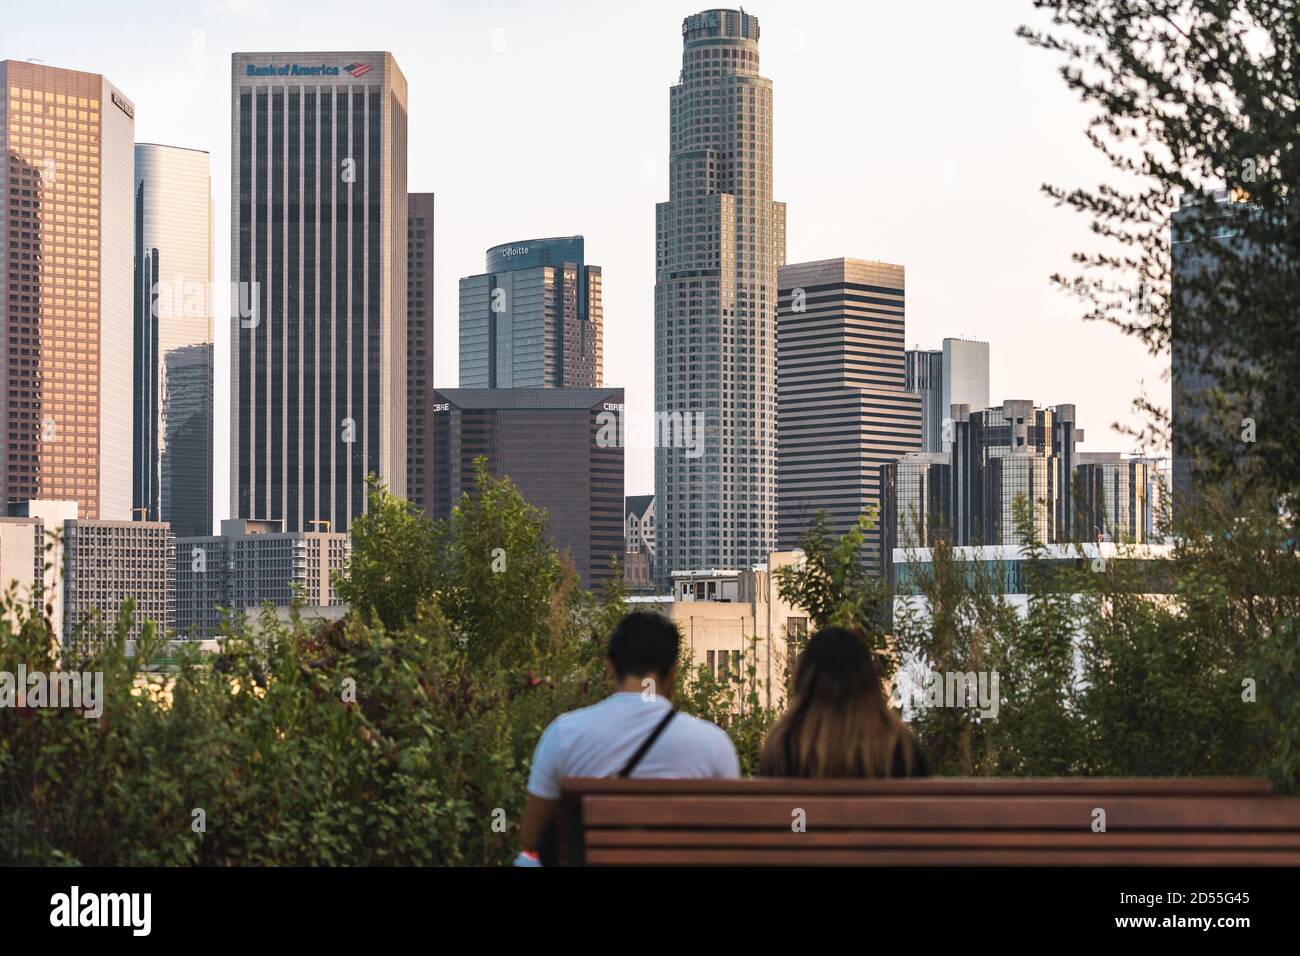 LOS ANGELES, UNITED STATES - Oct 08, 2020: Couple enjoying the sunset view of Los Angles from Vista Hermosa Park Stock Photo